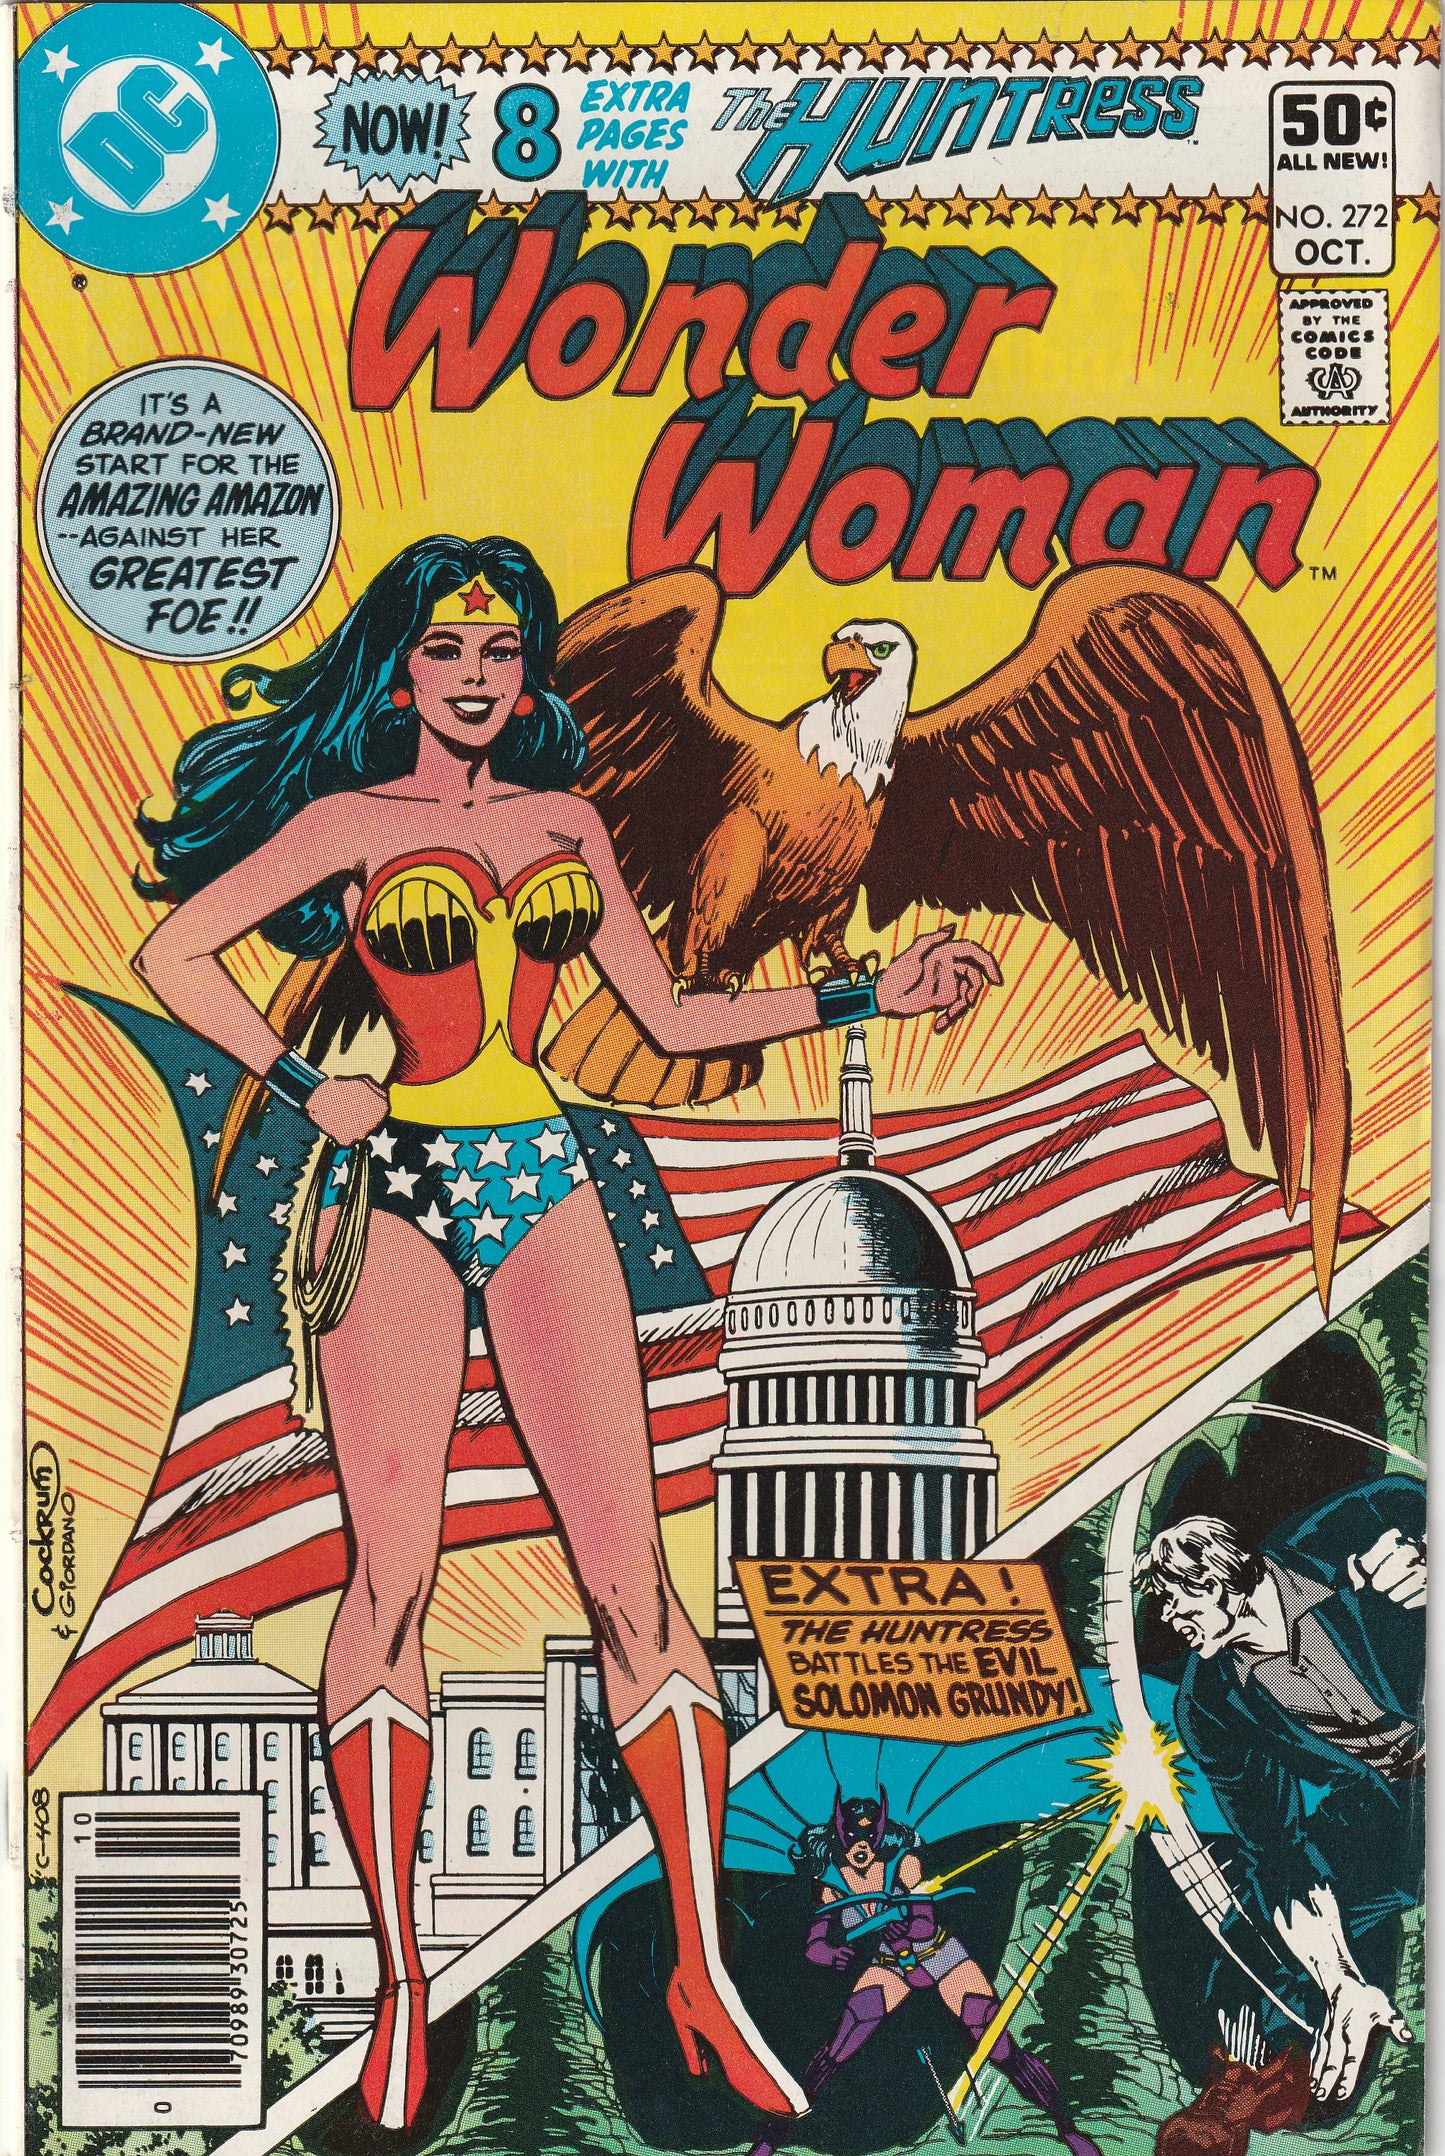 Wonder Woman #272 (1980) - Featuring The Huntress